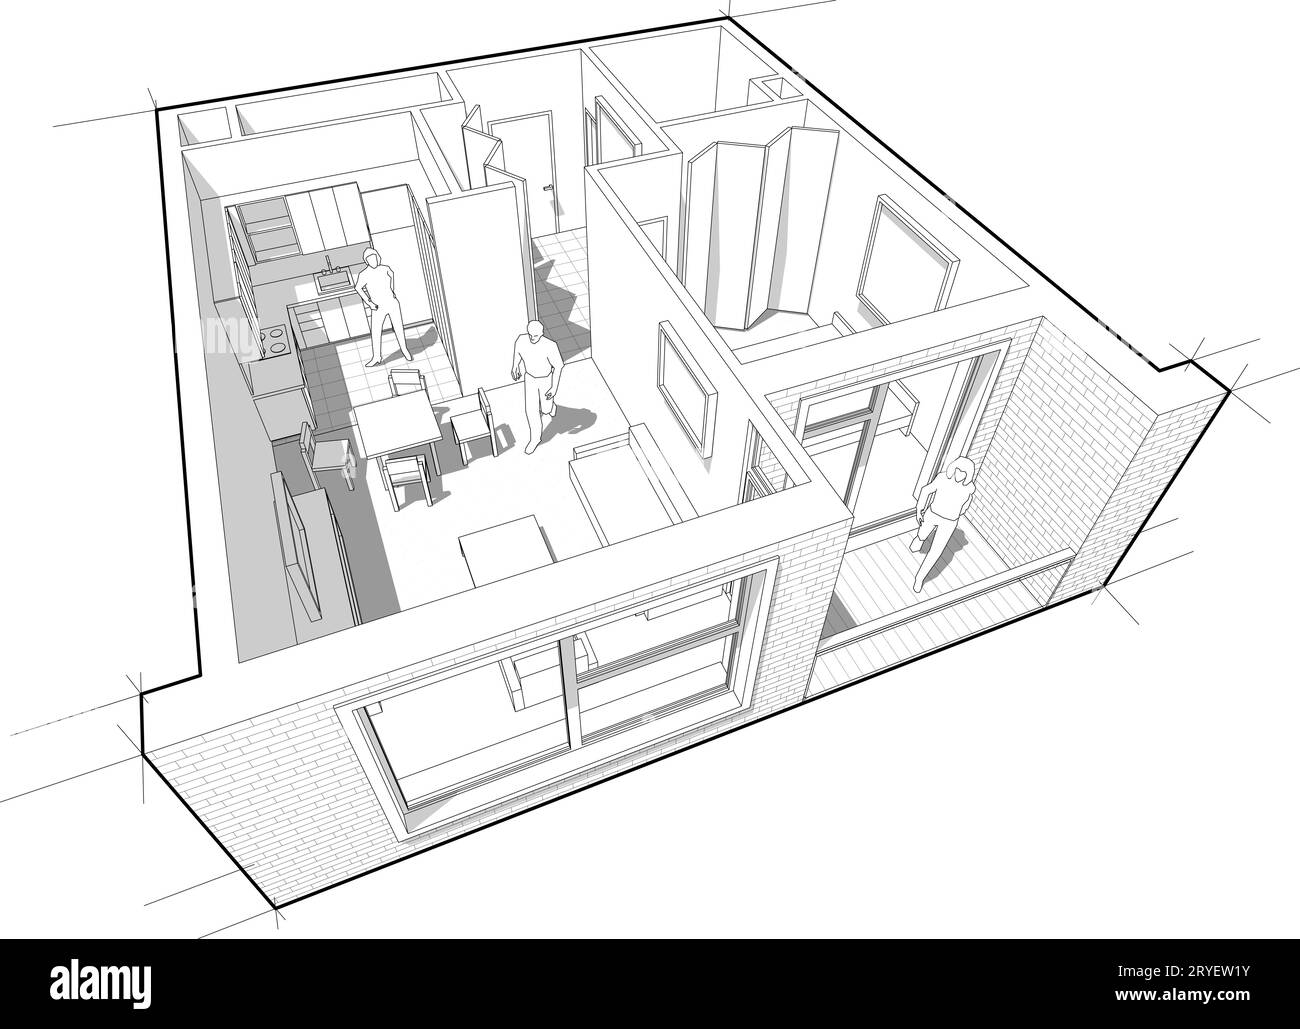 Perspective cutaway diagram of a one bedroom apartment completely furnished Stock Photo